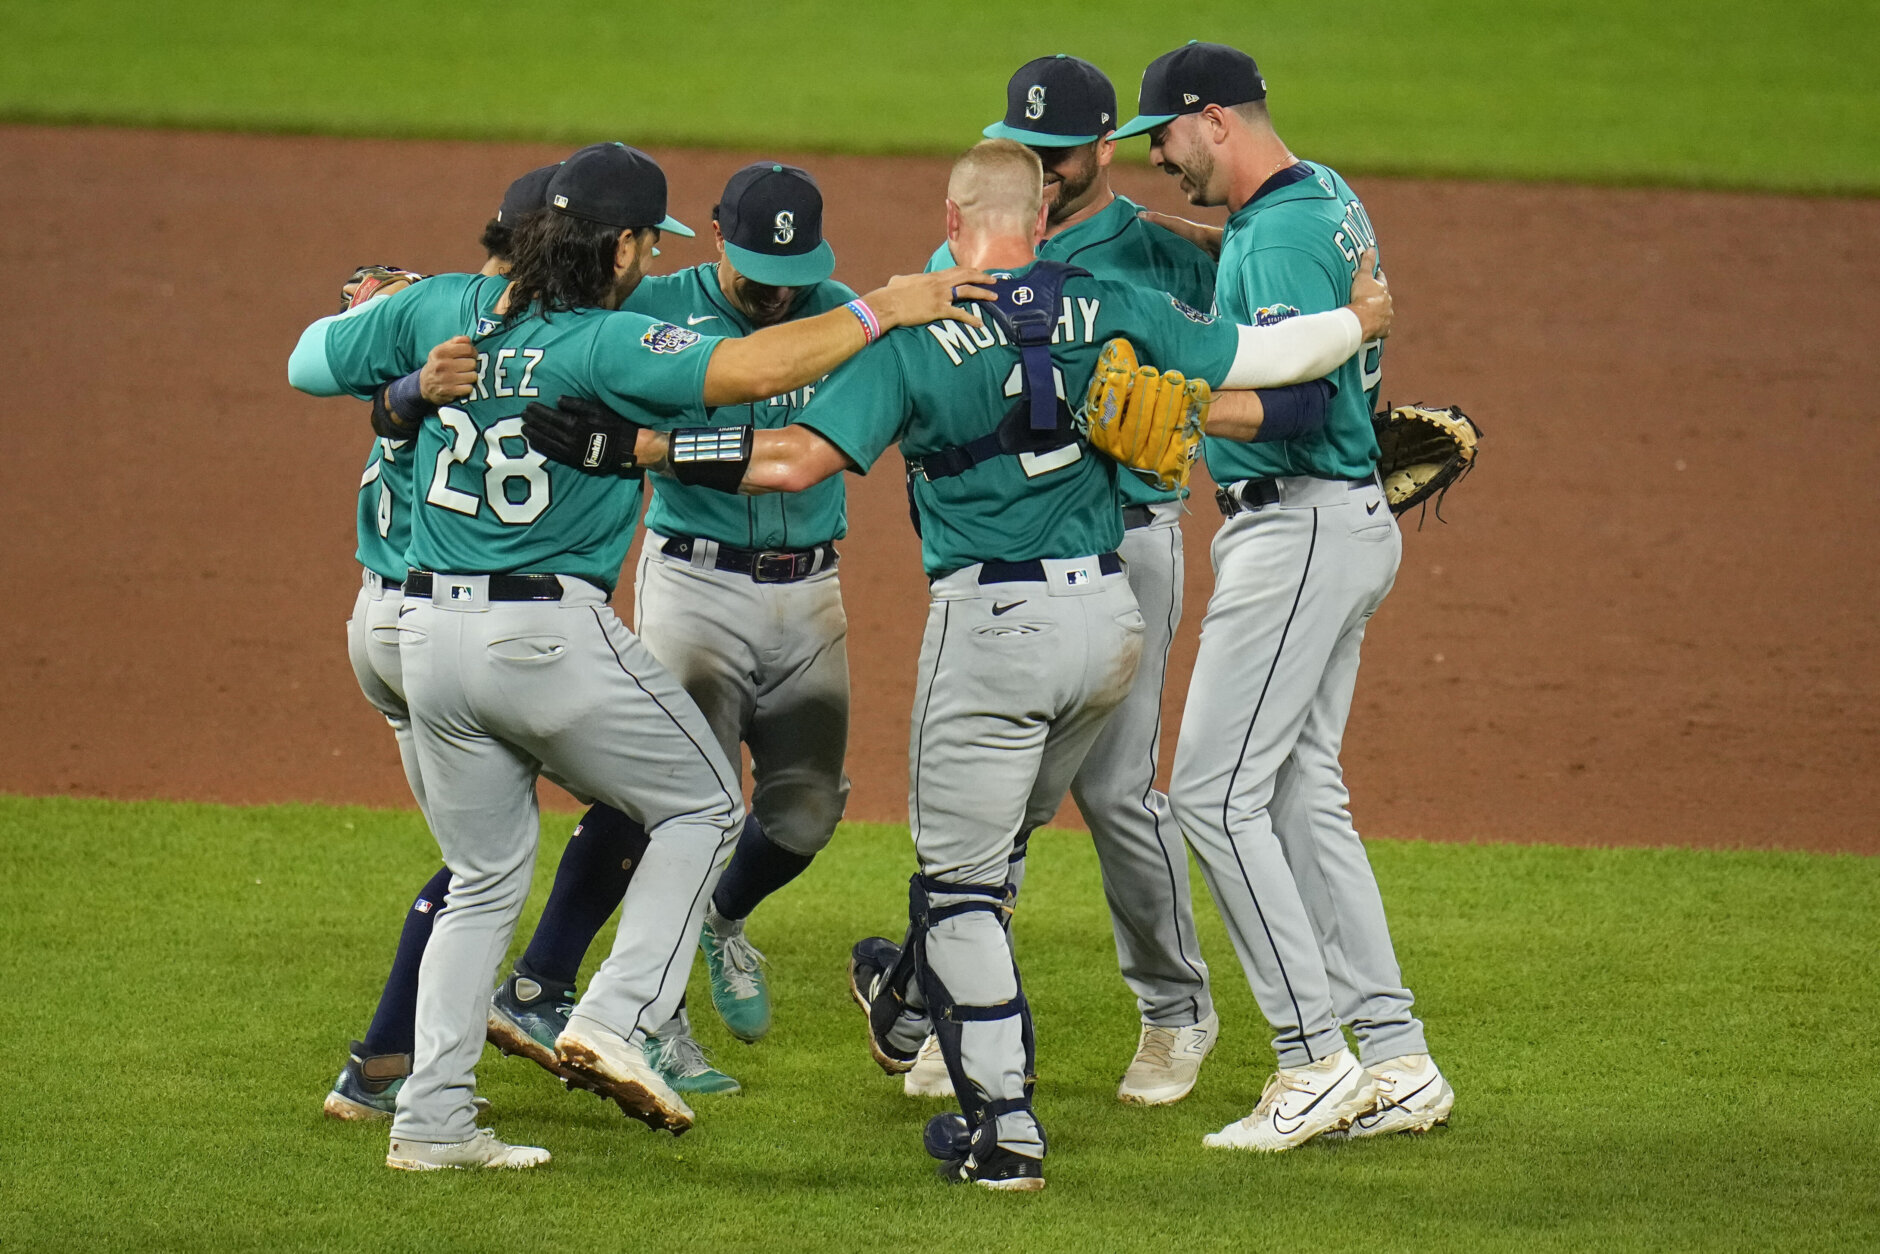 Mariners show off new uniforms, but they don't help them beat Astros, National Sports